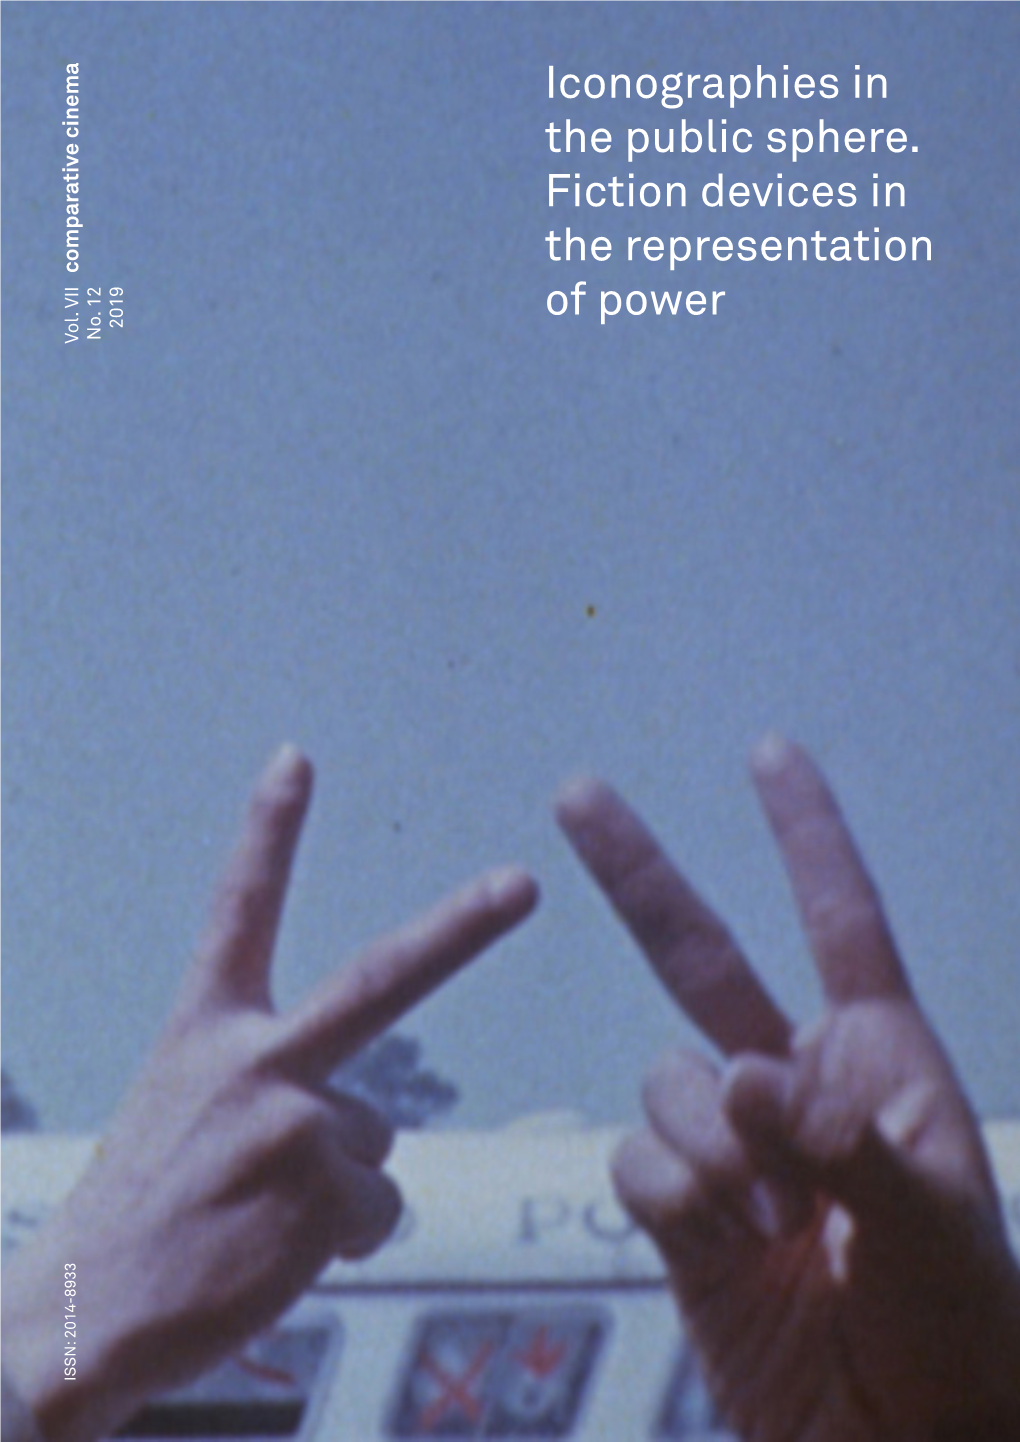 Iconographies in the Public Sphere. Fiction Devices in the Representation of Power», Barcelona, 2019